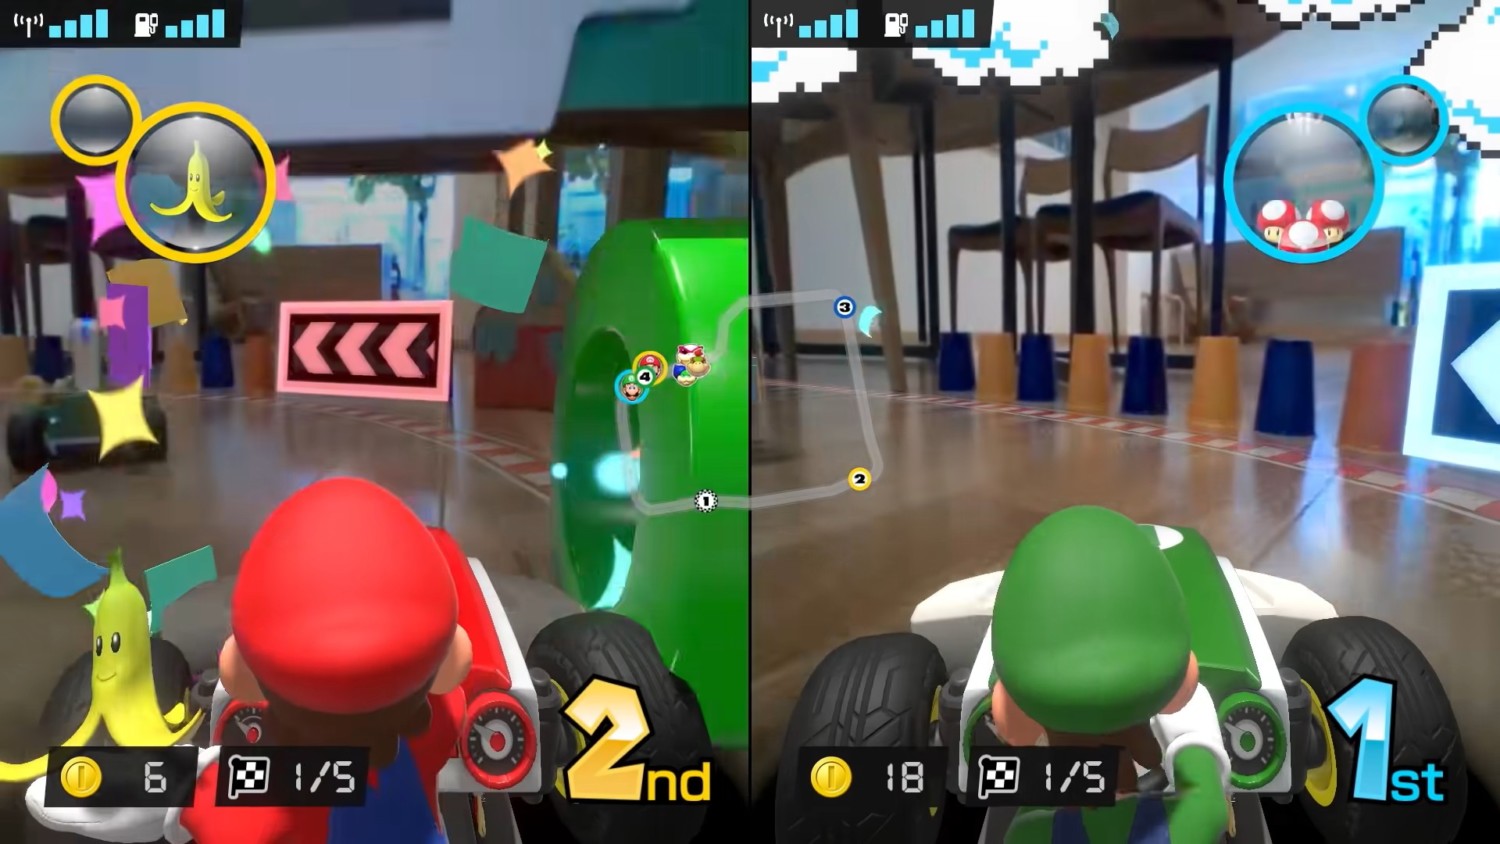 Nintendo finally adds landscape mode to 'Mario Kart Tour' in new